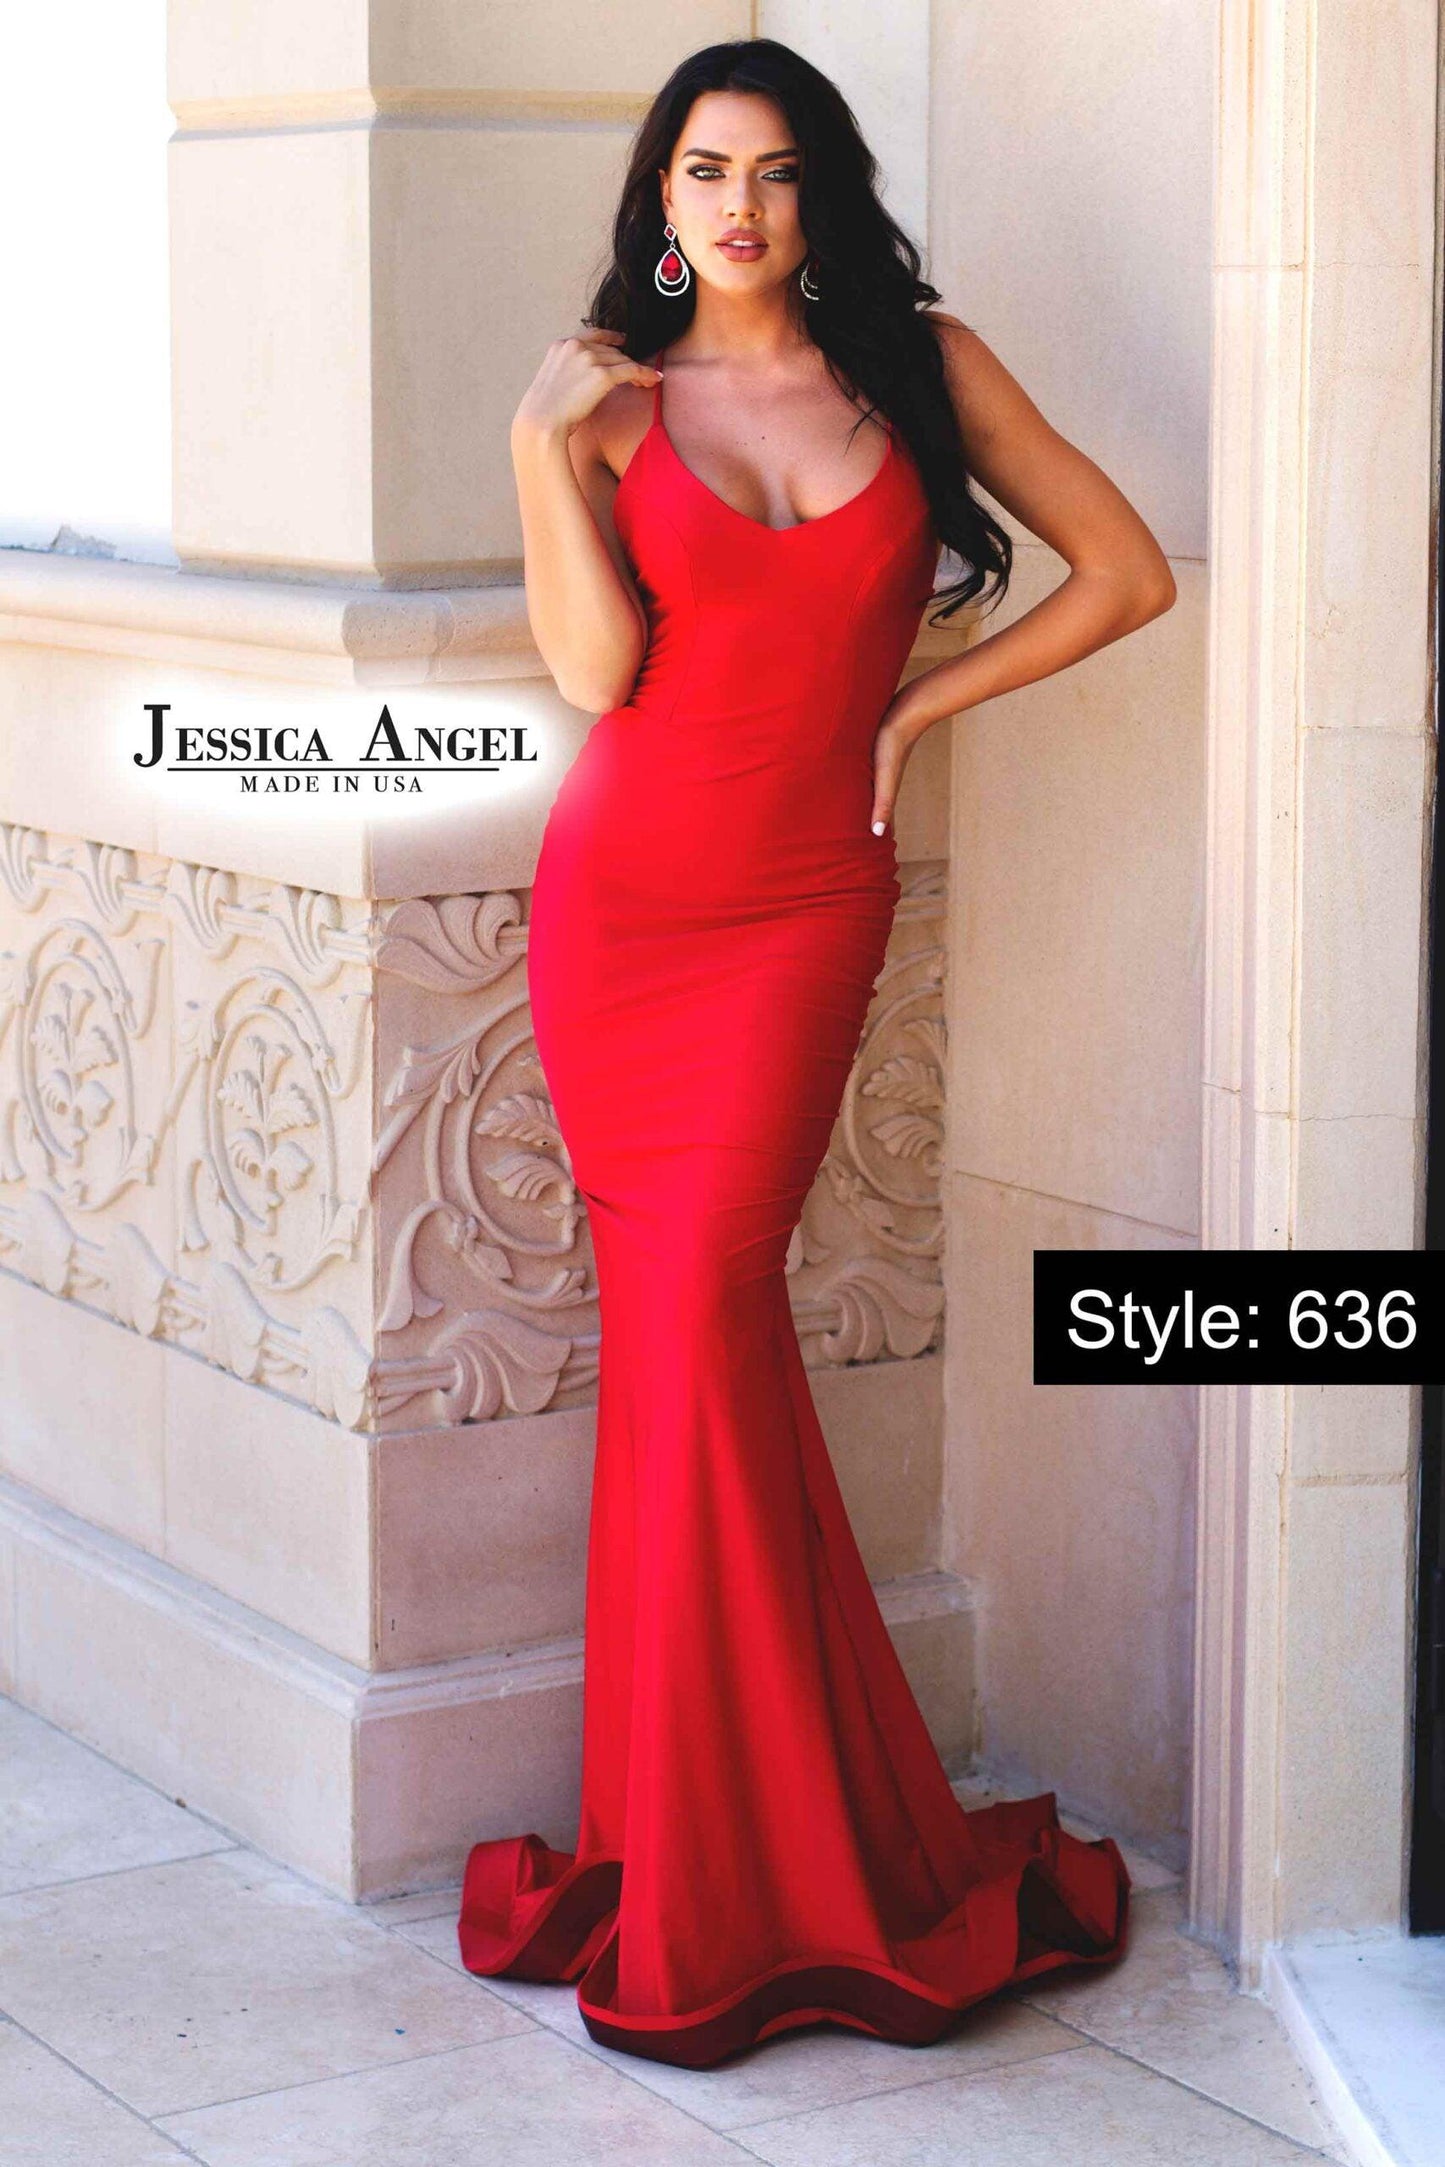 Jessica Angel Spaghetti Strap Long Evening Gown 636 - The Dress Outlet